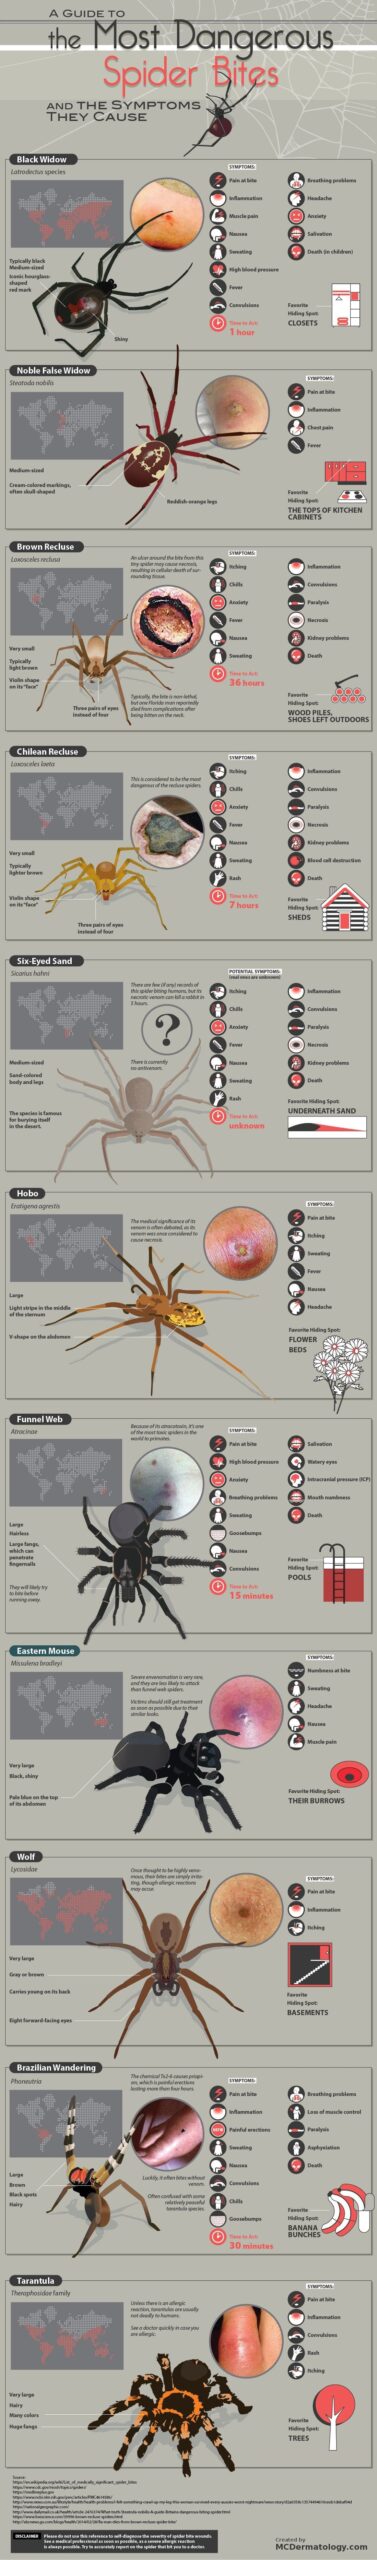 Spider bite guide. What do they look like?